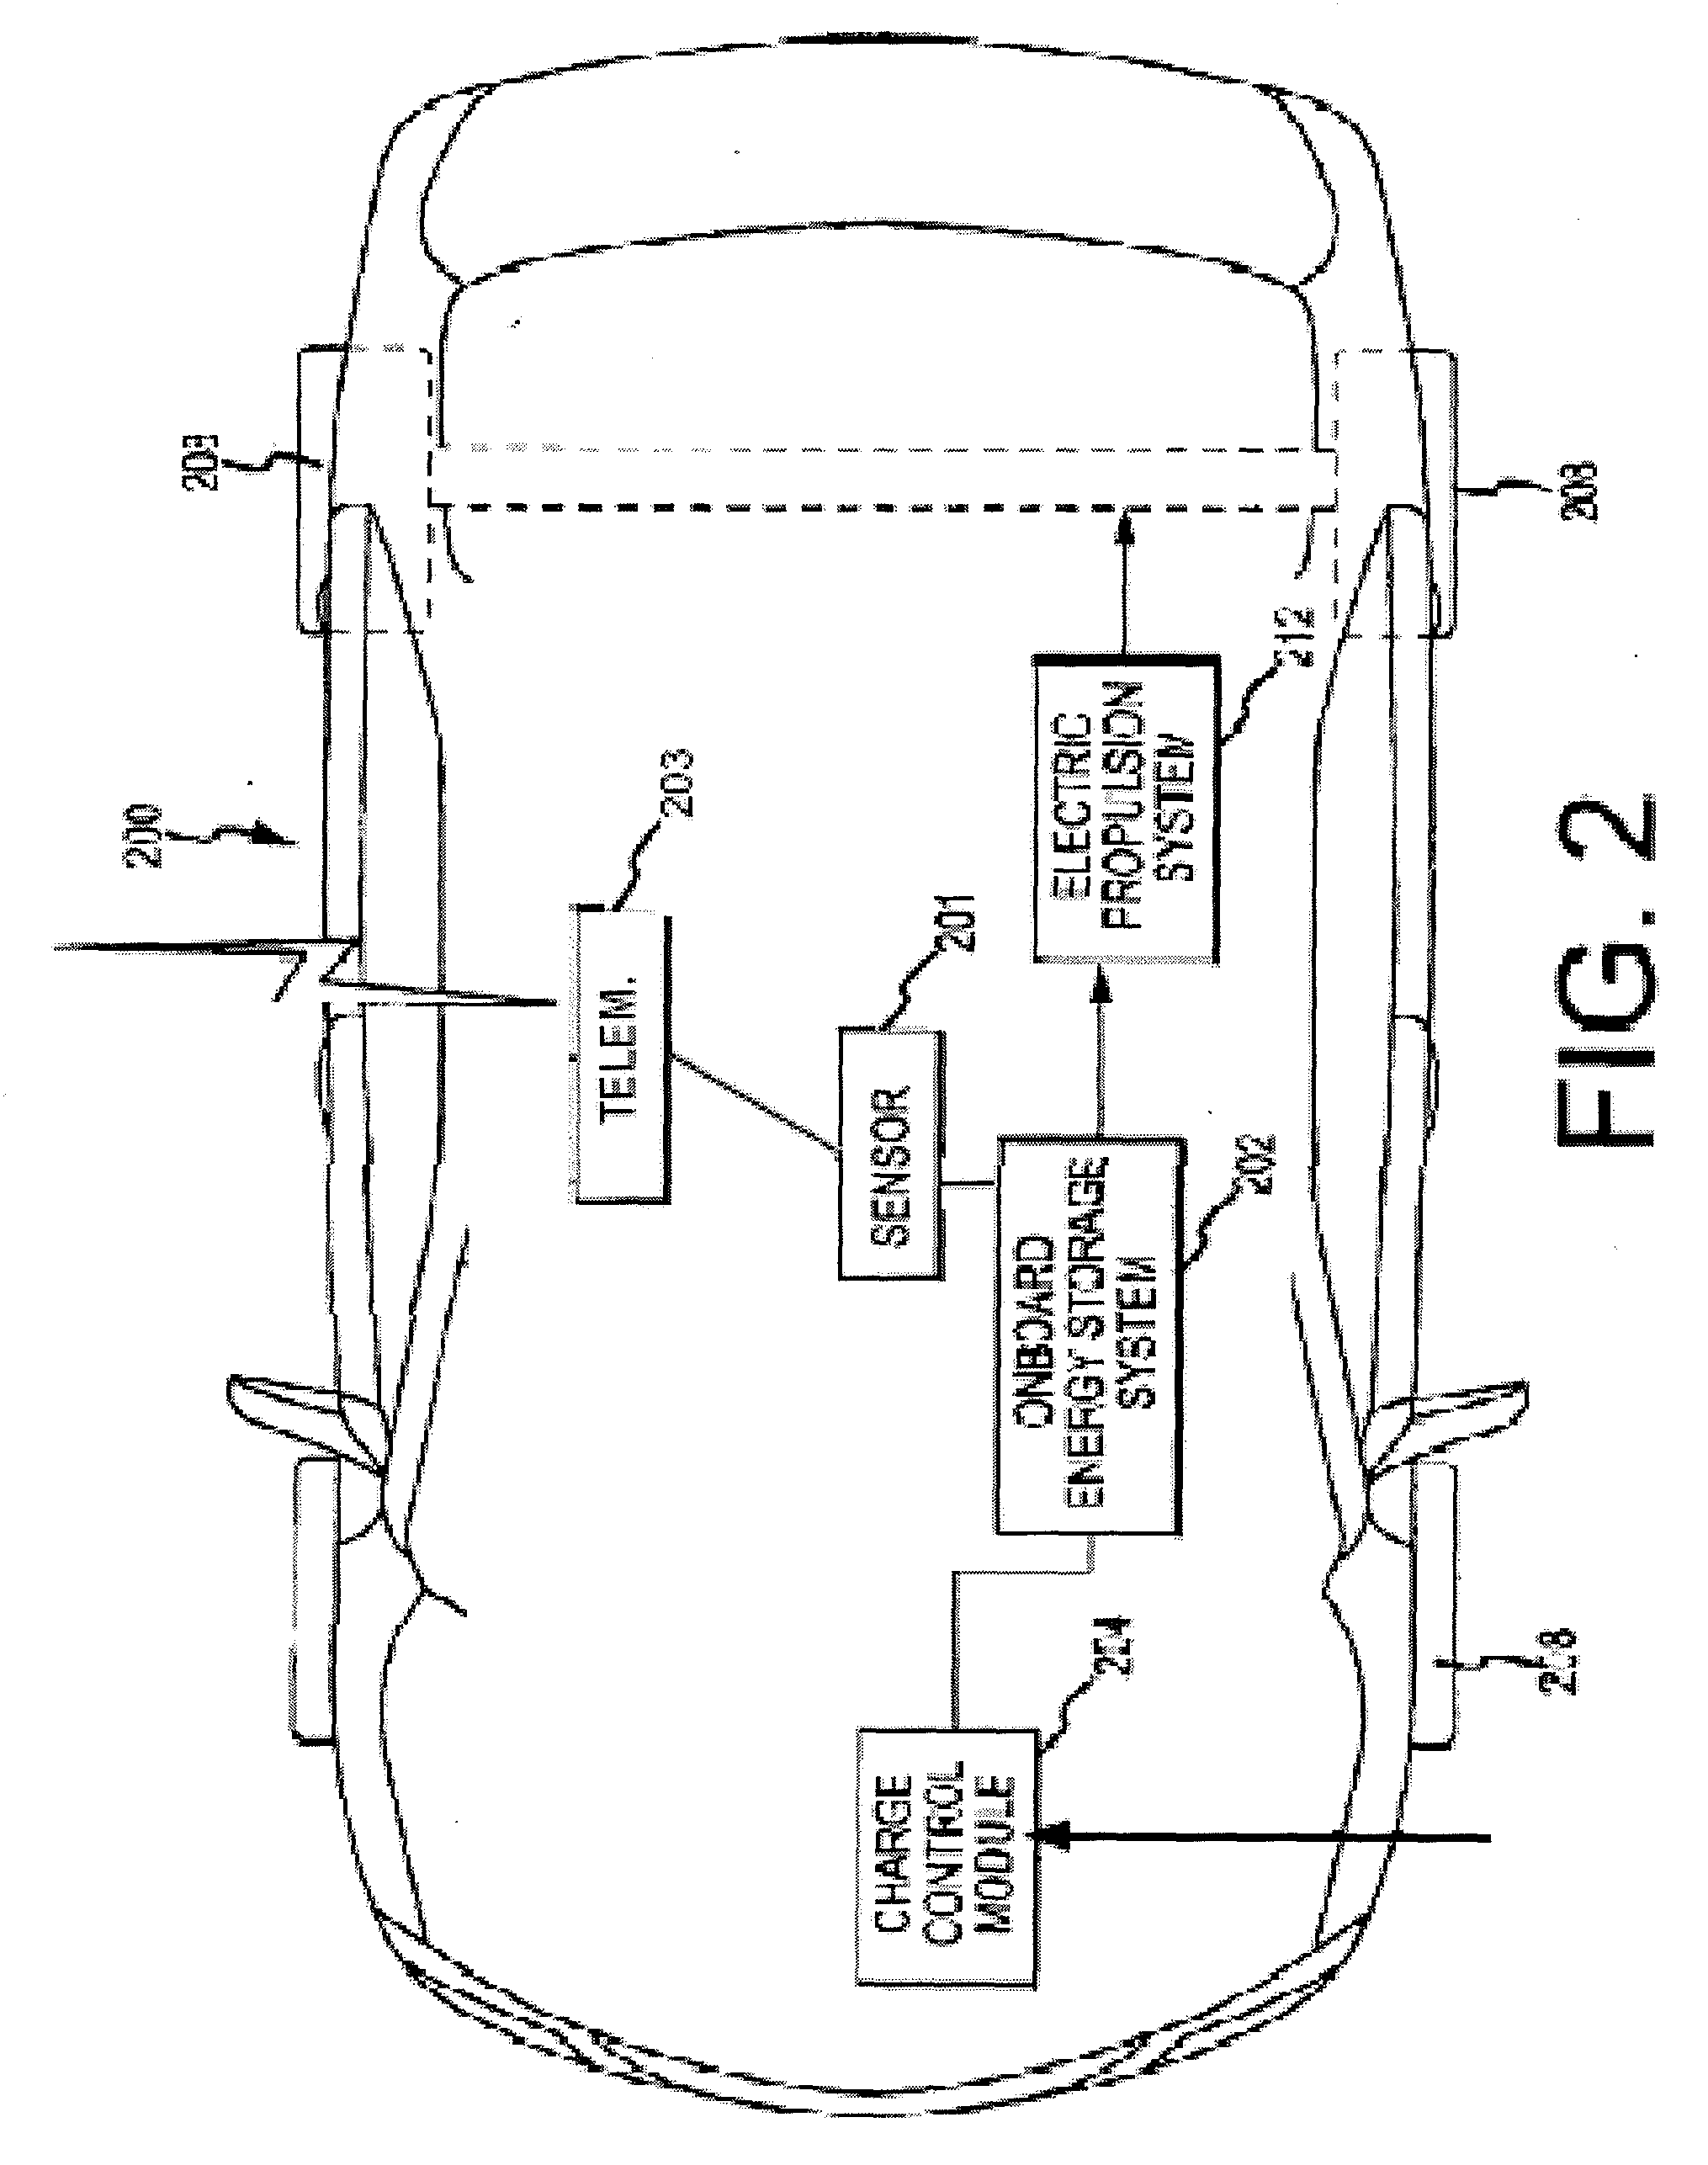 System and method for remote management of electric vehicle charge profiles